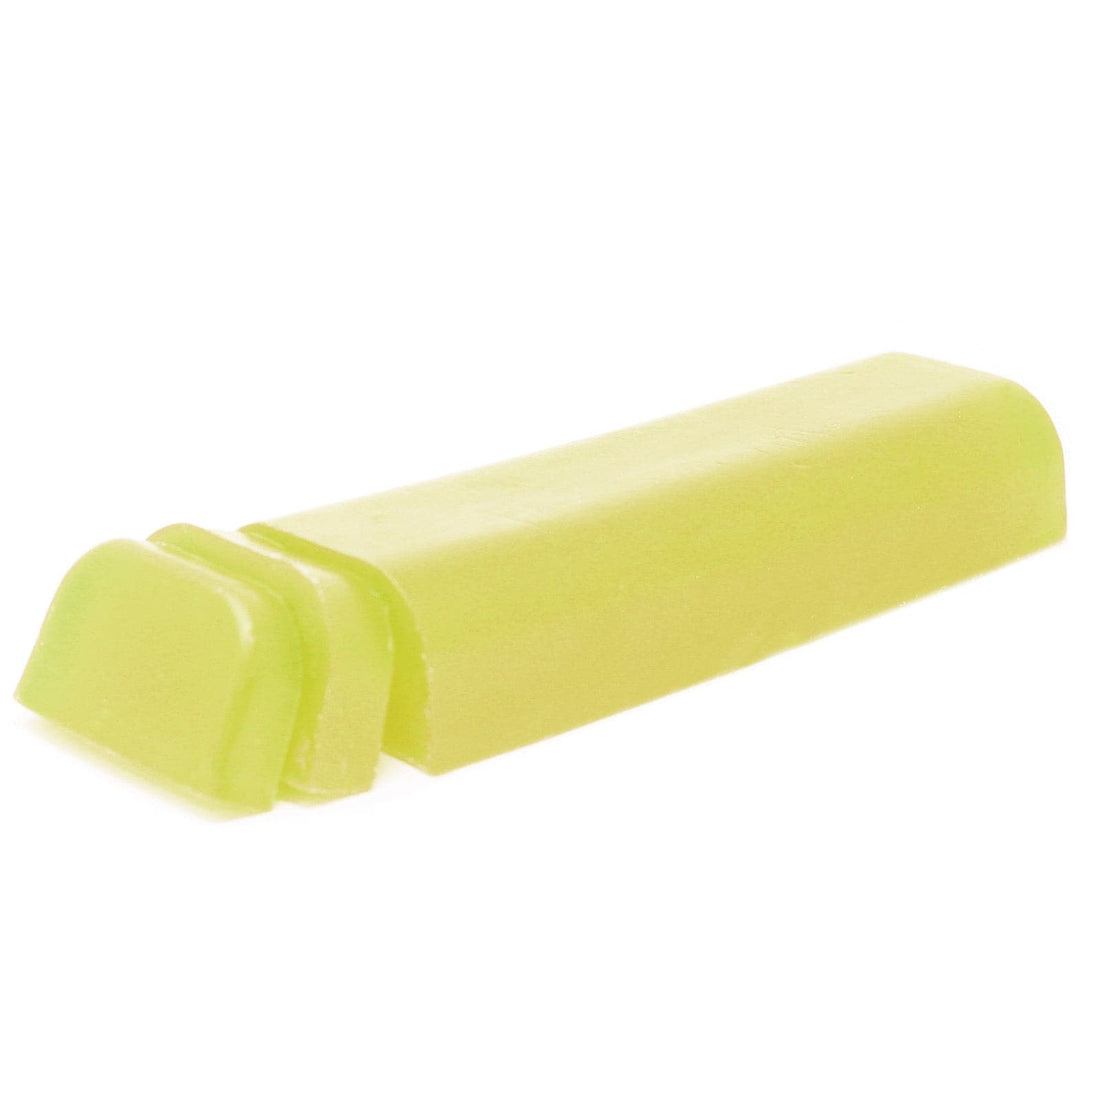 Coconut and Lime - Solid Shampoo - best price from Maltashopper.com SOLID-06